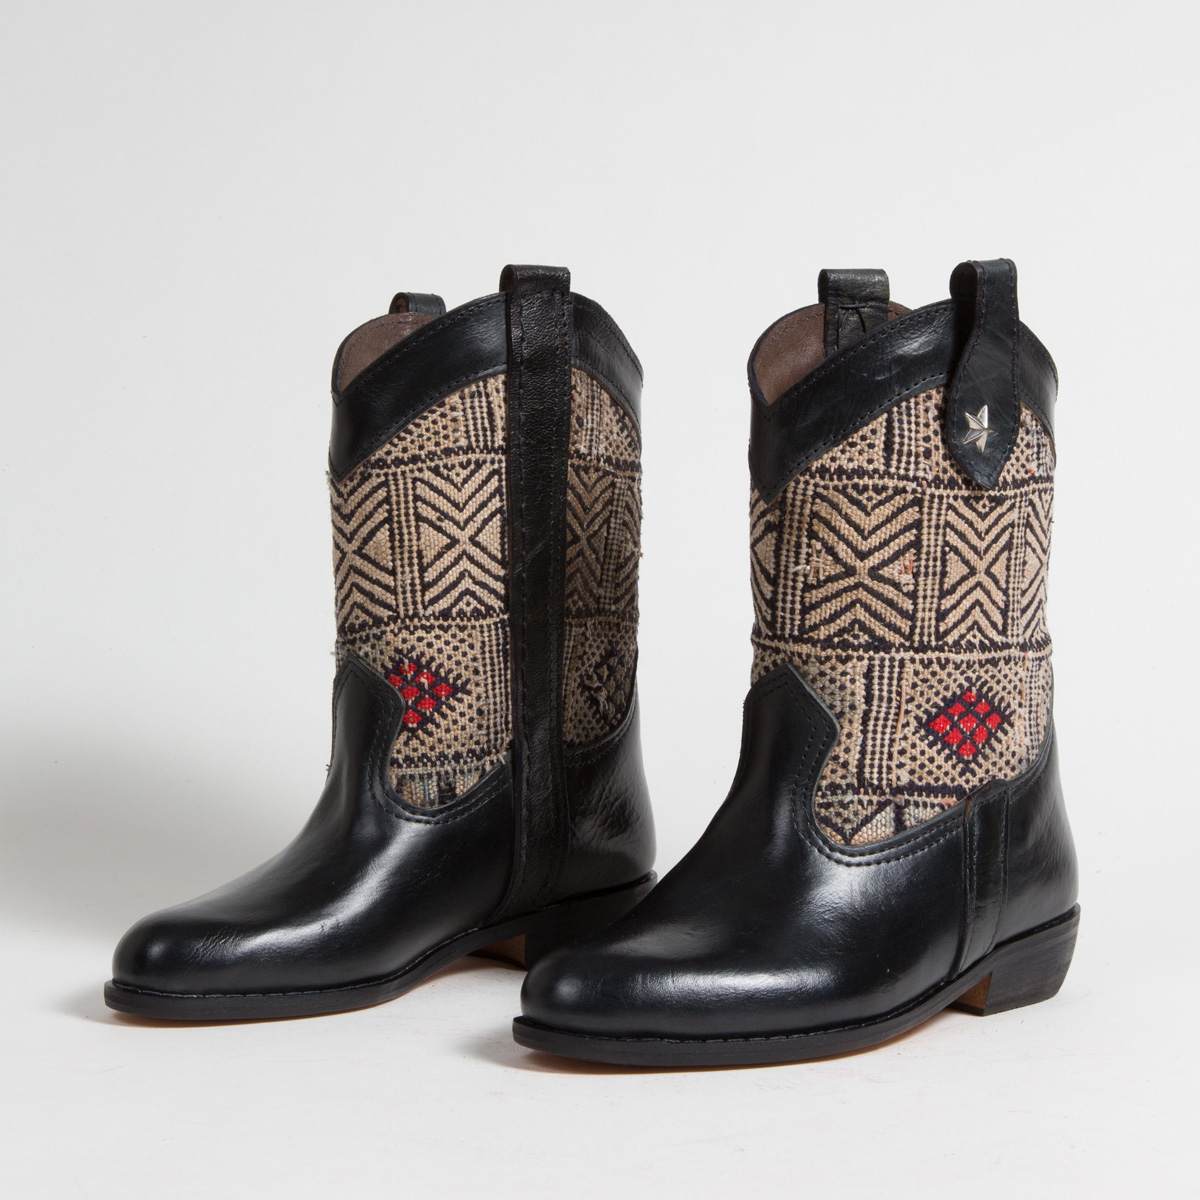 Bottines Kilim cuir mababouche artisanales (Réf. MN1-36)